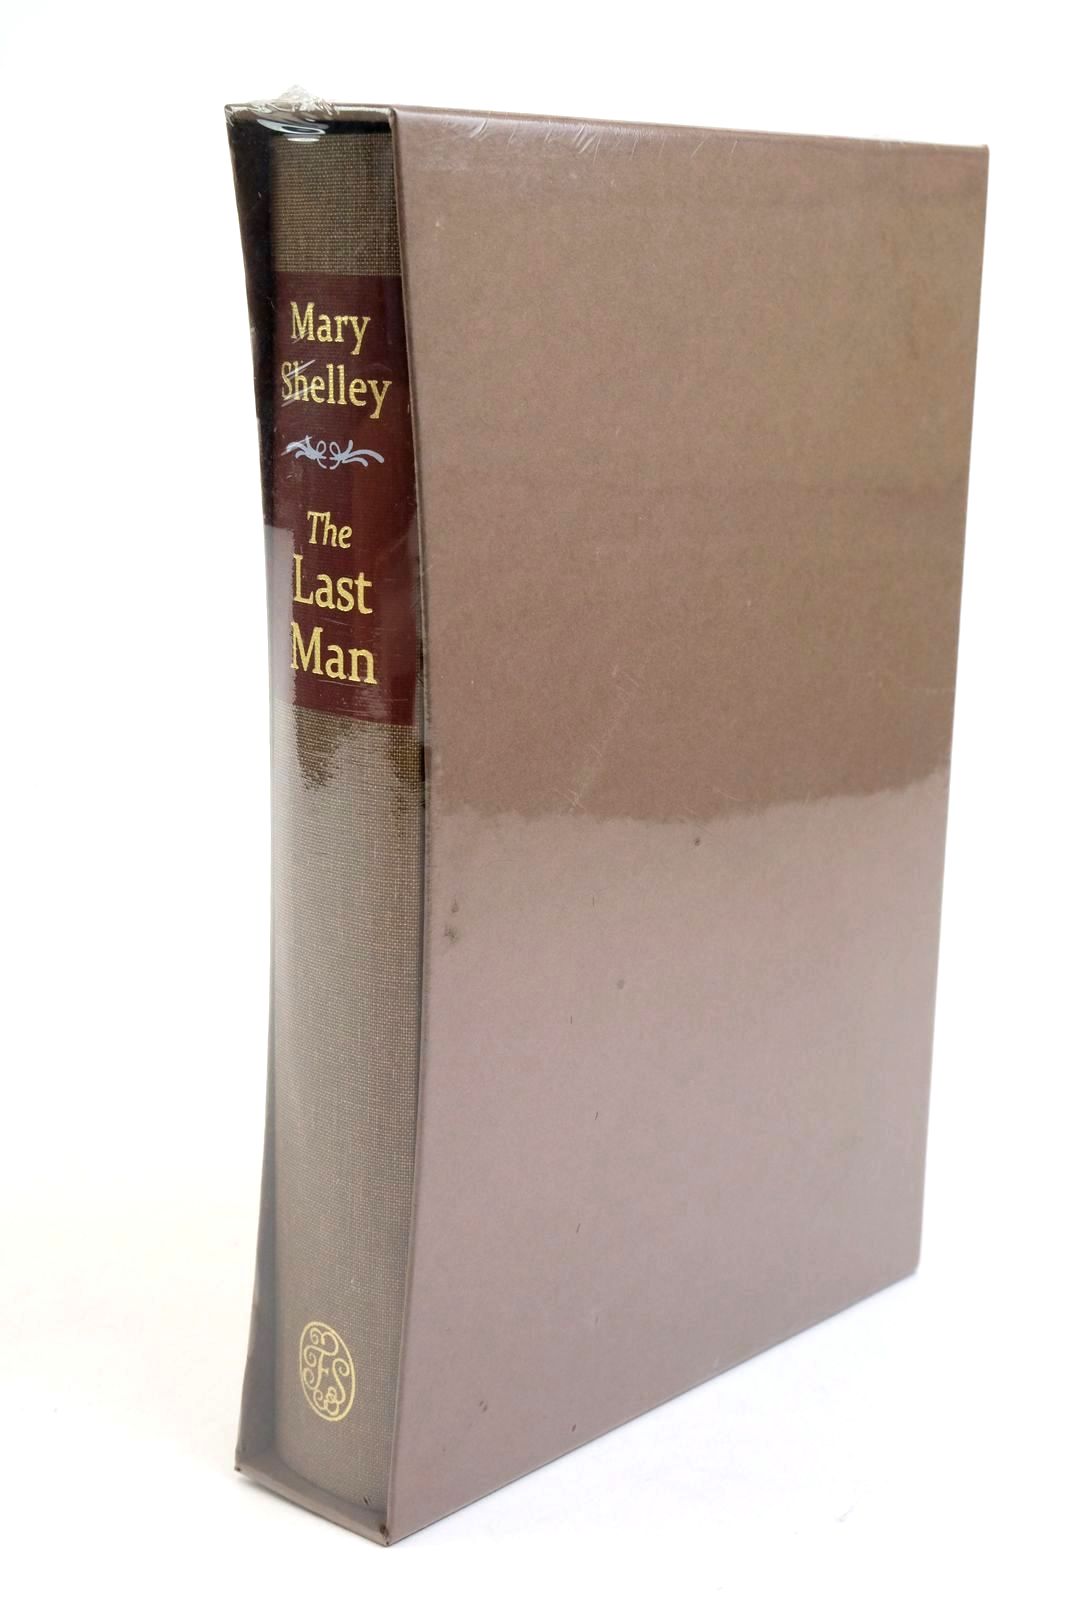 Photo of THE LAST MAN written by Shelley, Mary Hall, Sarah illustrated by Friedrich, Caspar David published by Folio Society (STOCK CODE: 1321936)  for sale by Stella & Rose's Books